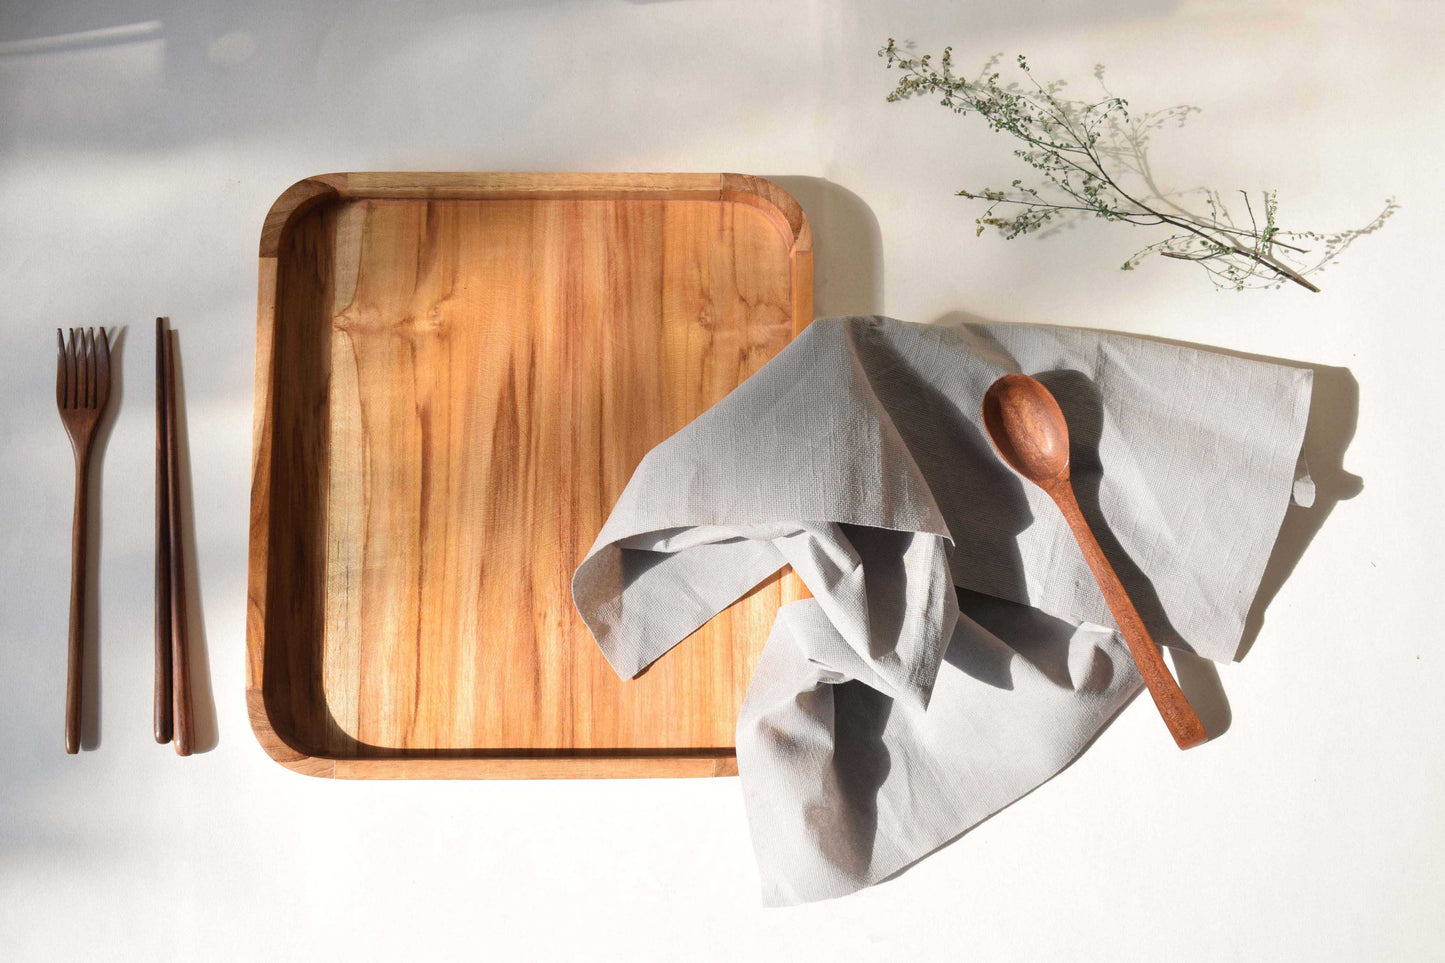 wooden cutlery for tabletop decor and utility